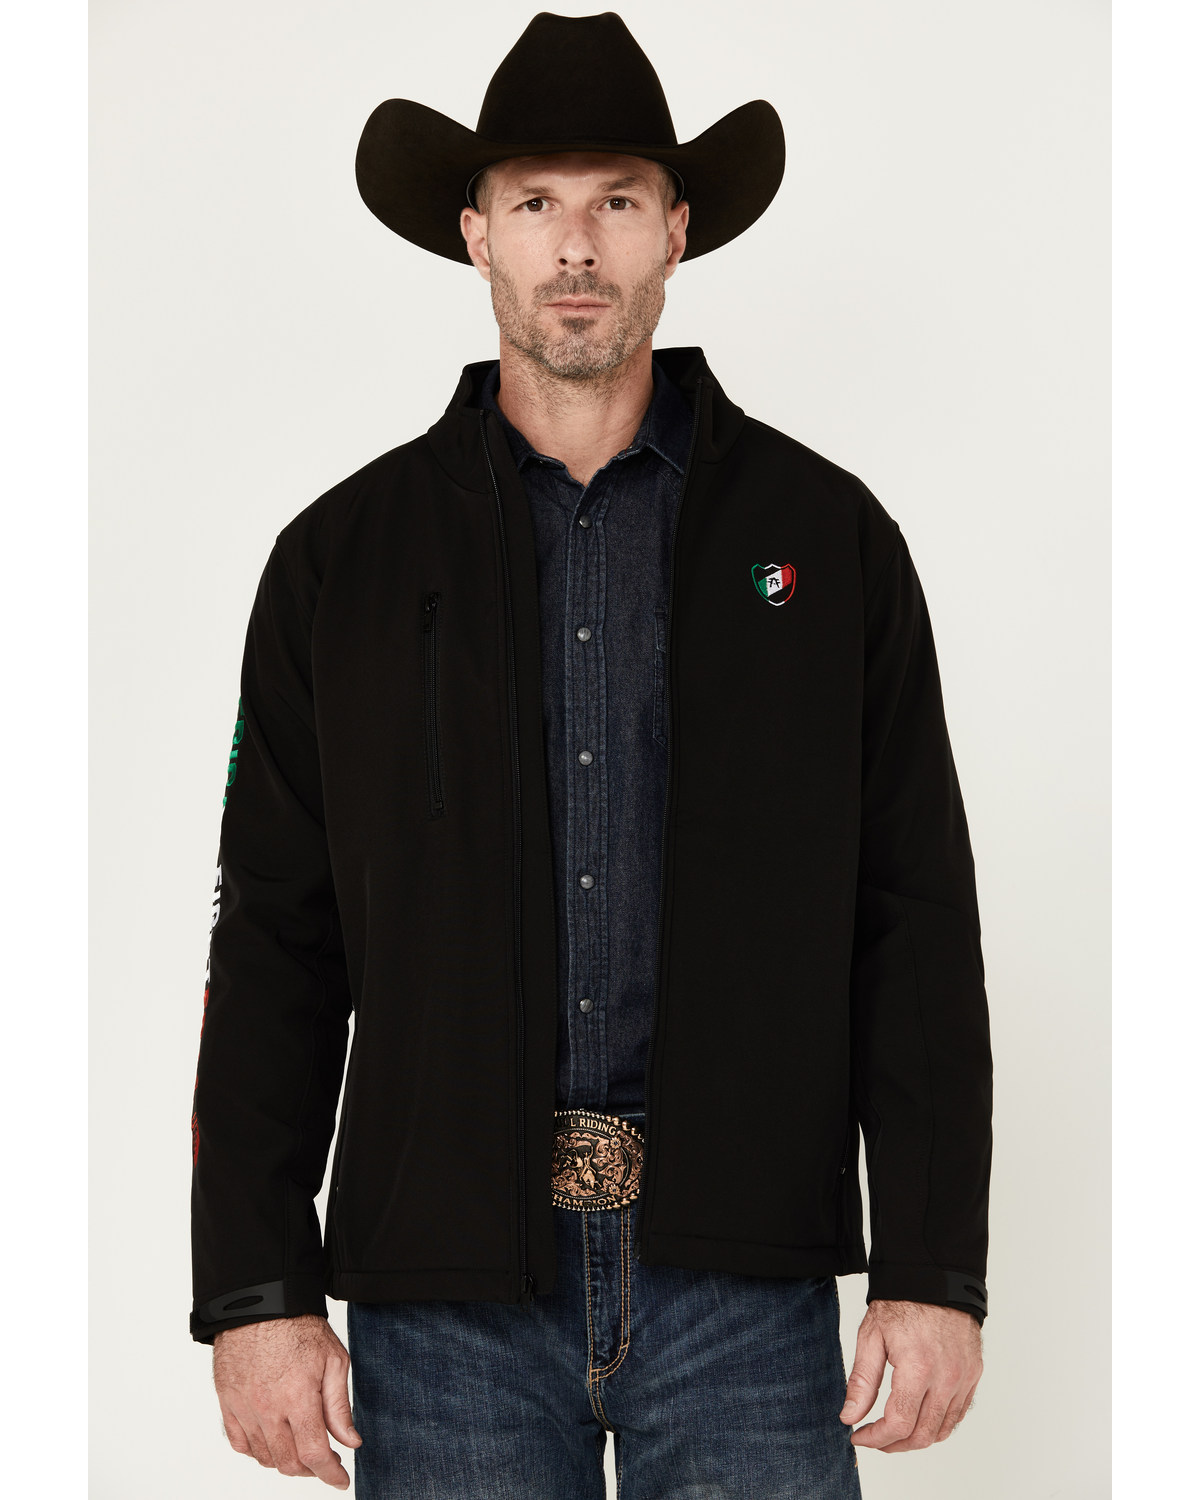 American Fighter Men's Mayland Mexico USA Flag Embroidered Softshell Jacket